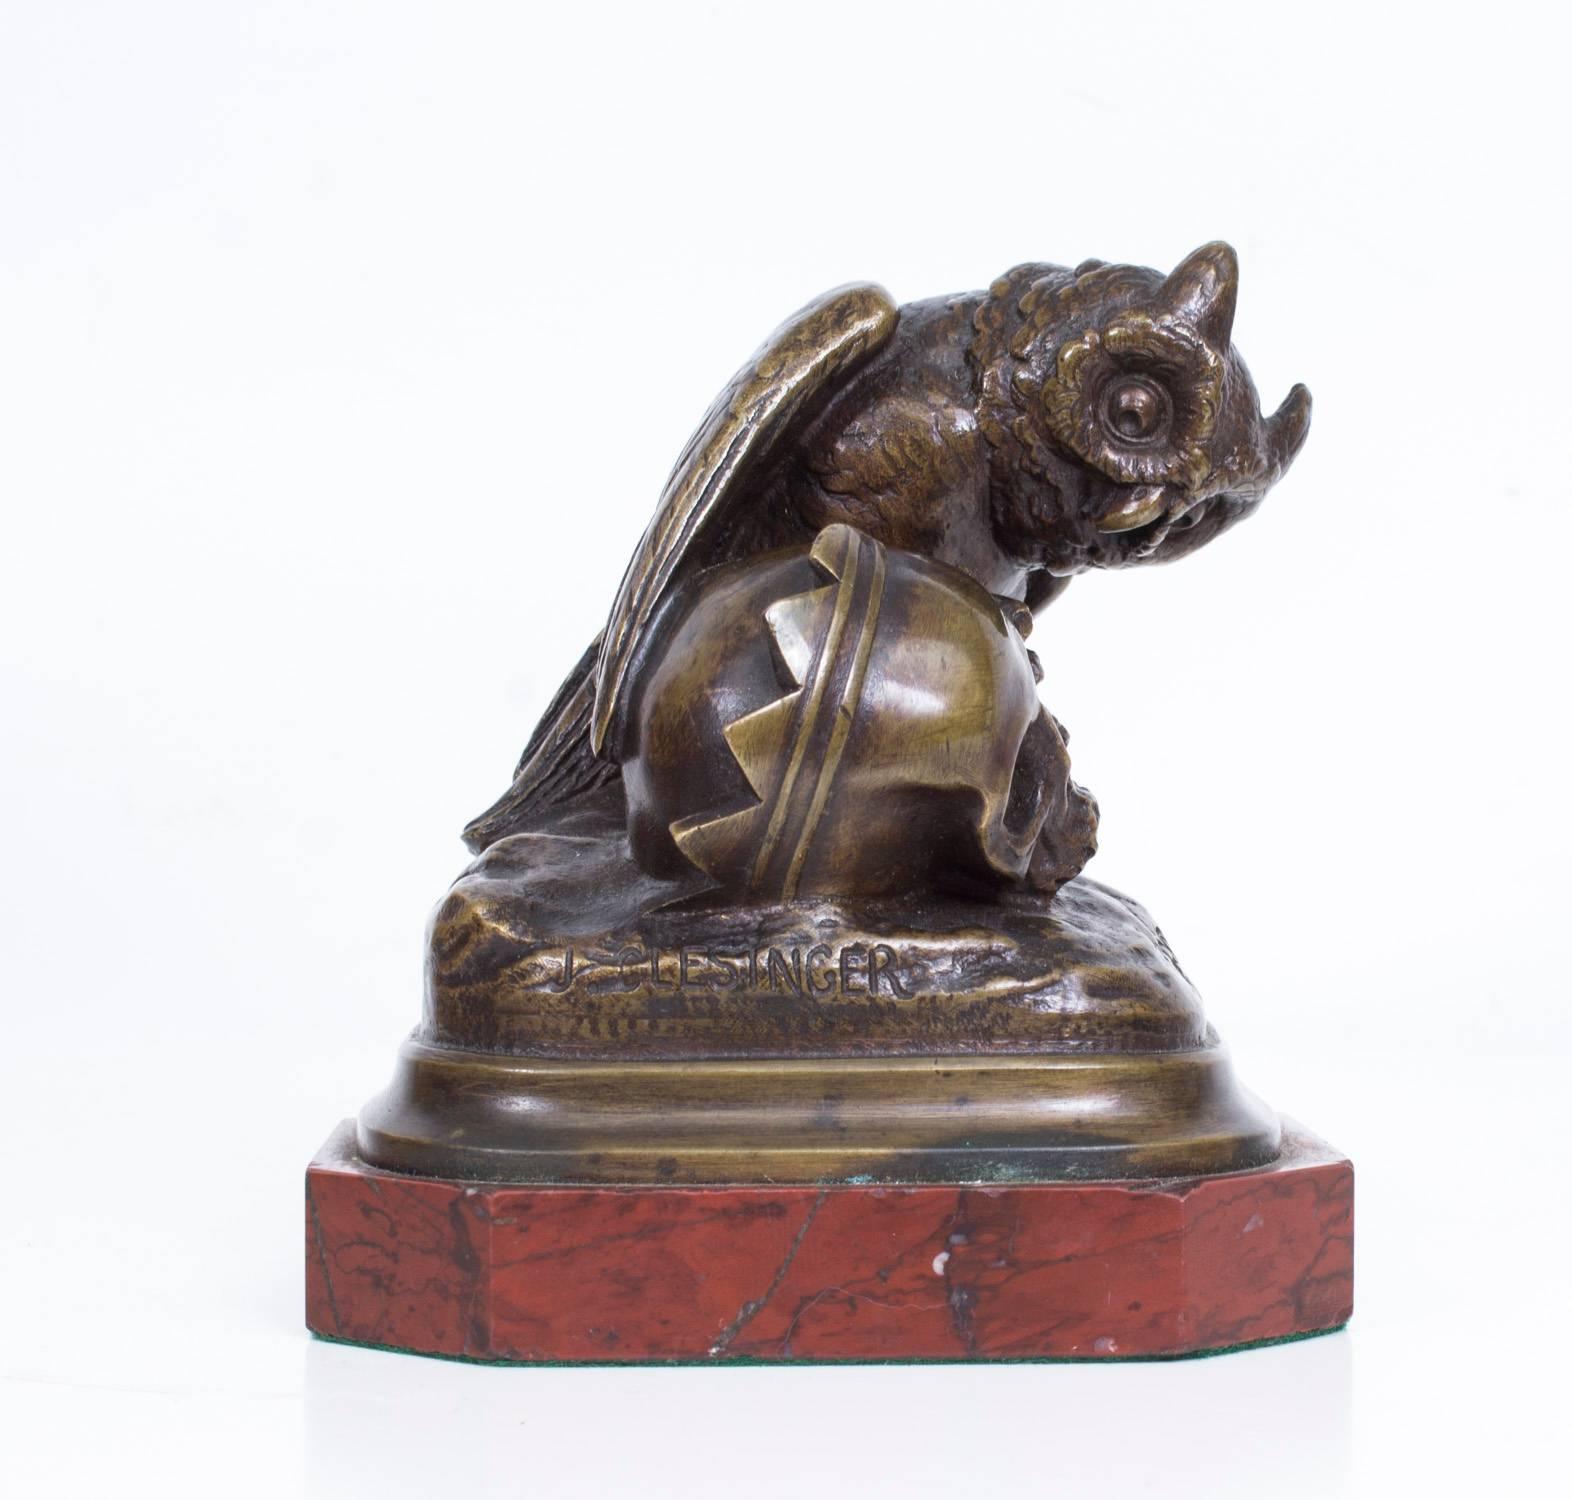 This is a striking bronze by the famous French sculptor Jean-Baptiste Clésinger circa 1850 in date.

This is a stunning bronze "Rien" Memento Mori bronze, ideal as a desk weight, in the form of an owl perched over a human skull upon an